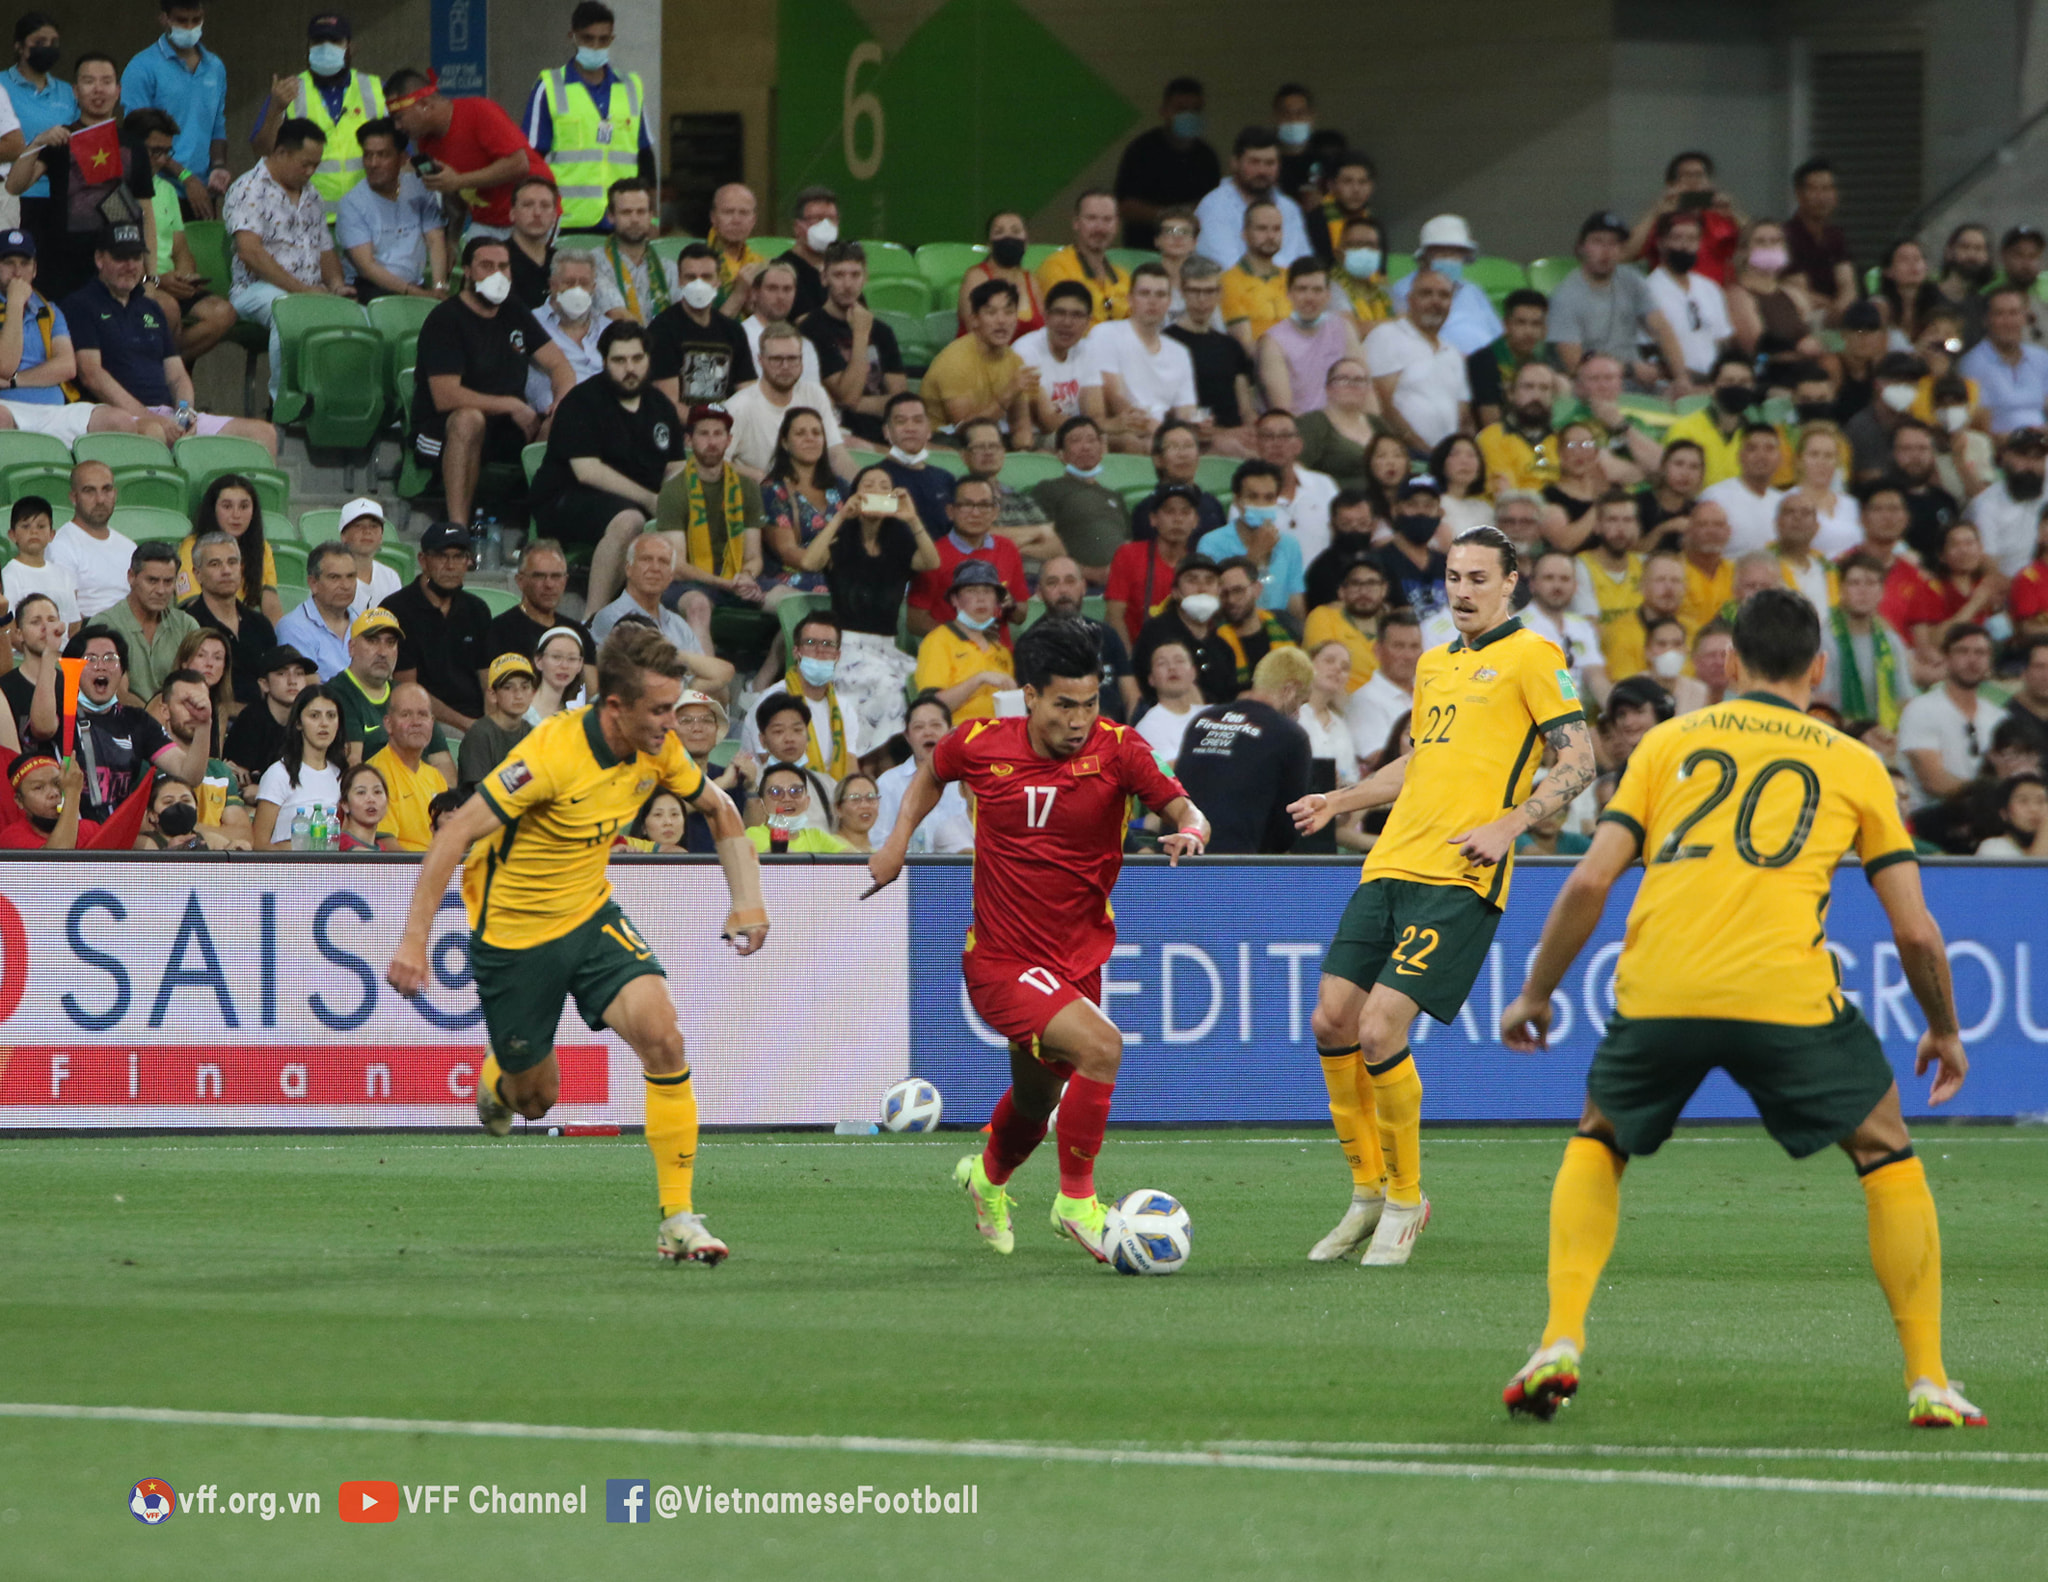 Vietnam officially out of World Cup after 0-4 loss to Australia